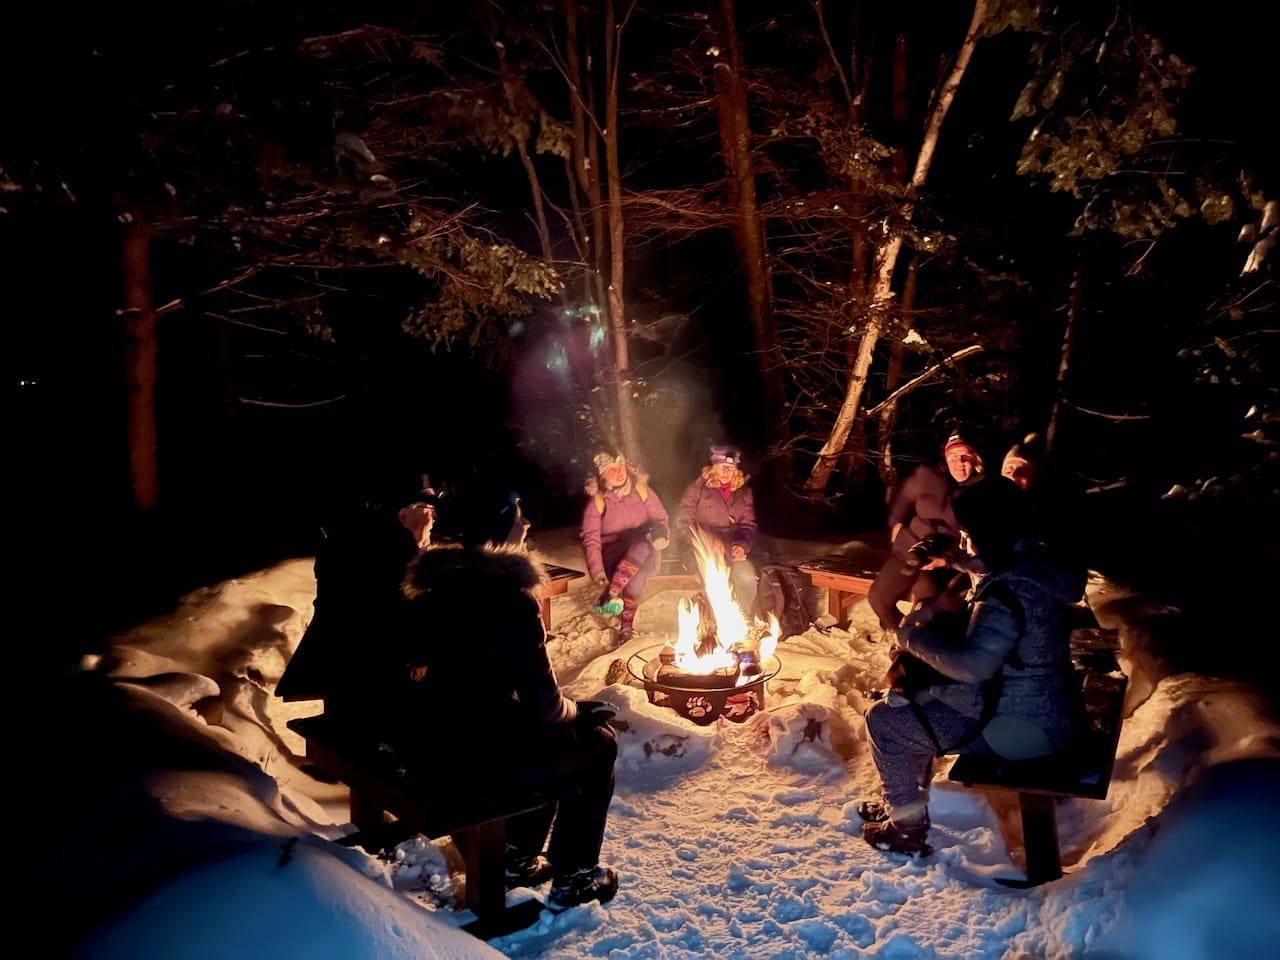 A bonfire is in order after an activities-filled day at Northern Edge Algonquin.